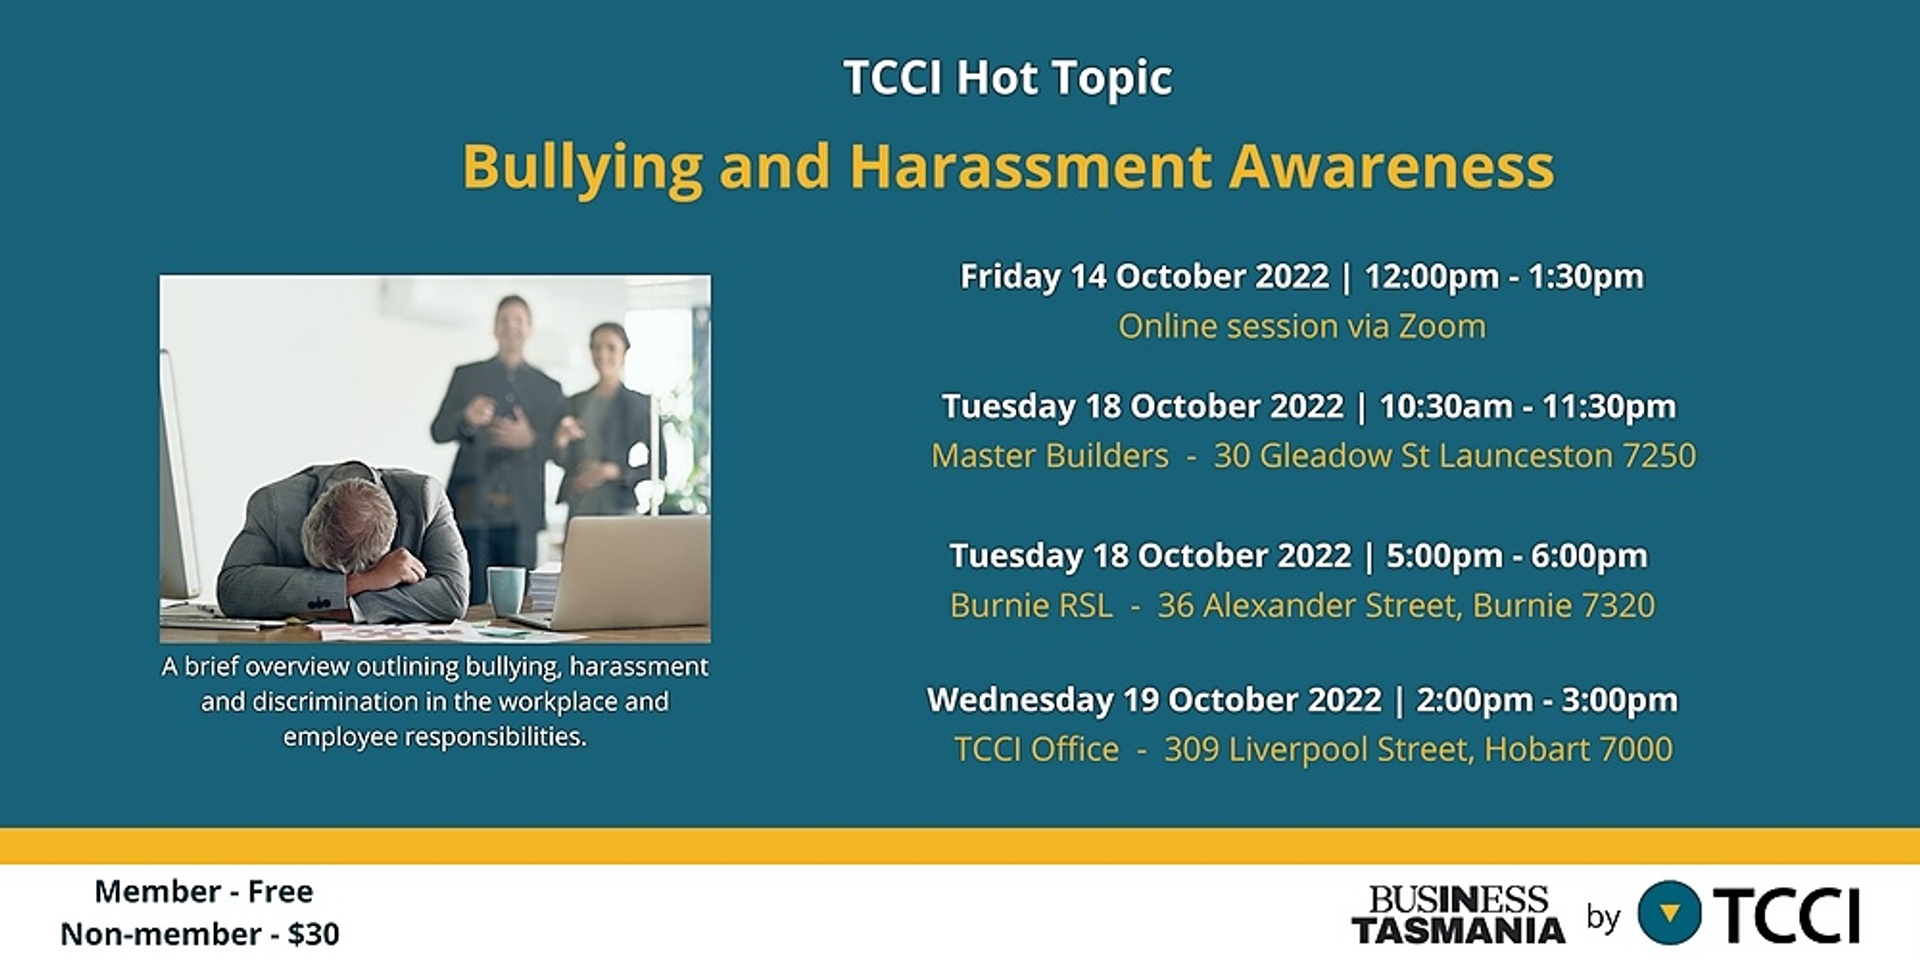 TCCI Hot Topic - Bullying and Harassment (Hobart)